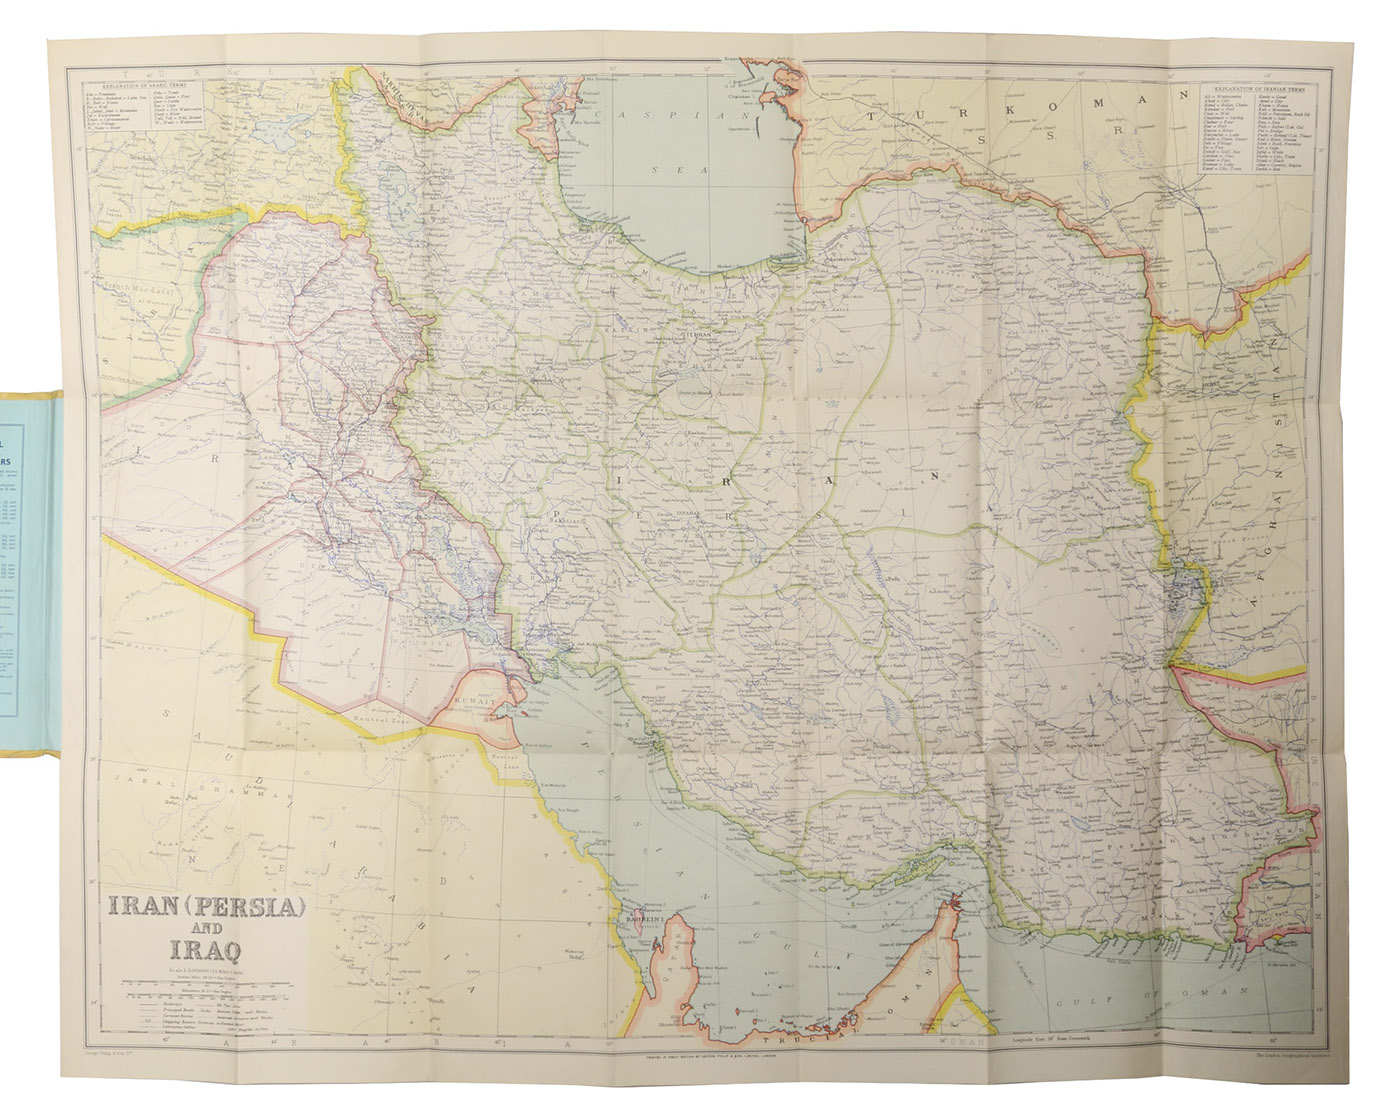 [MAP - IRAN - IRAQ]. PHILIP & SON. - Iran (Persia) and Iraq.London, George Philip & sons, [1930s]. Colour printed map, 54 x 68 cm, with yellow covers (19.5 x 11 cm).